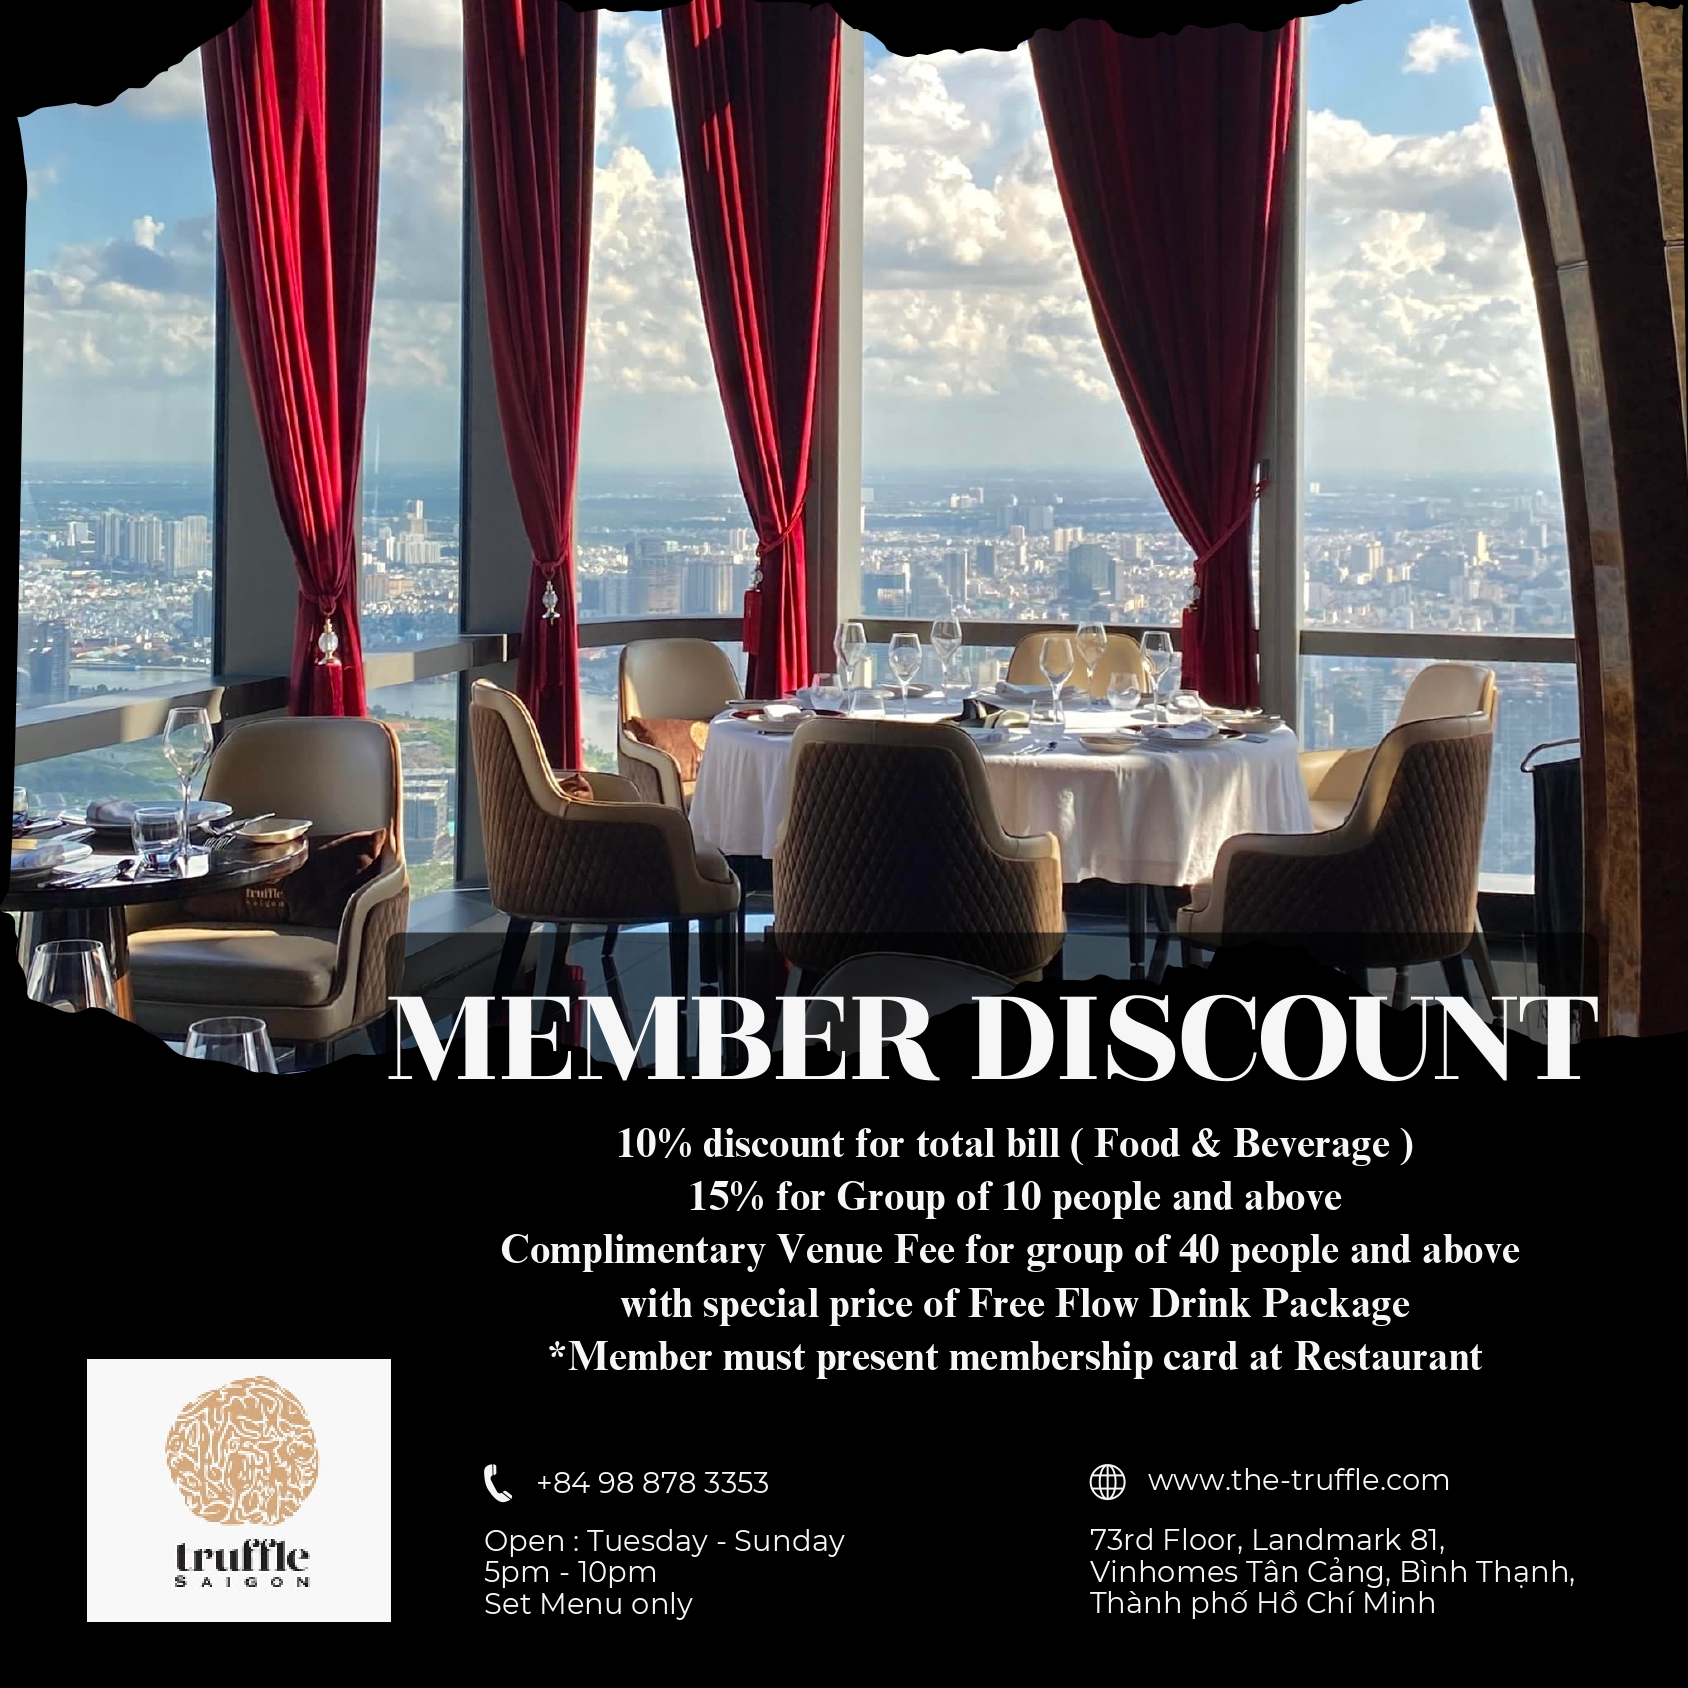 Truffle Restaurant offer 10% discount & other more for our Members